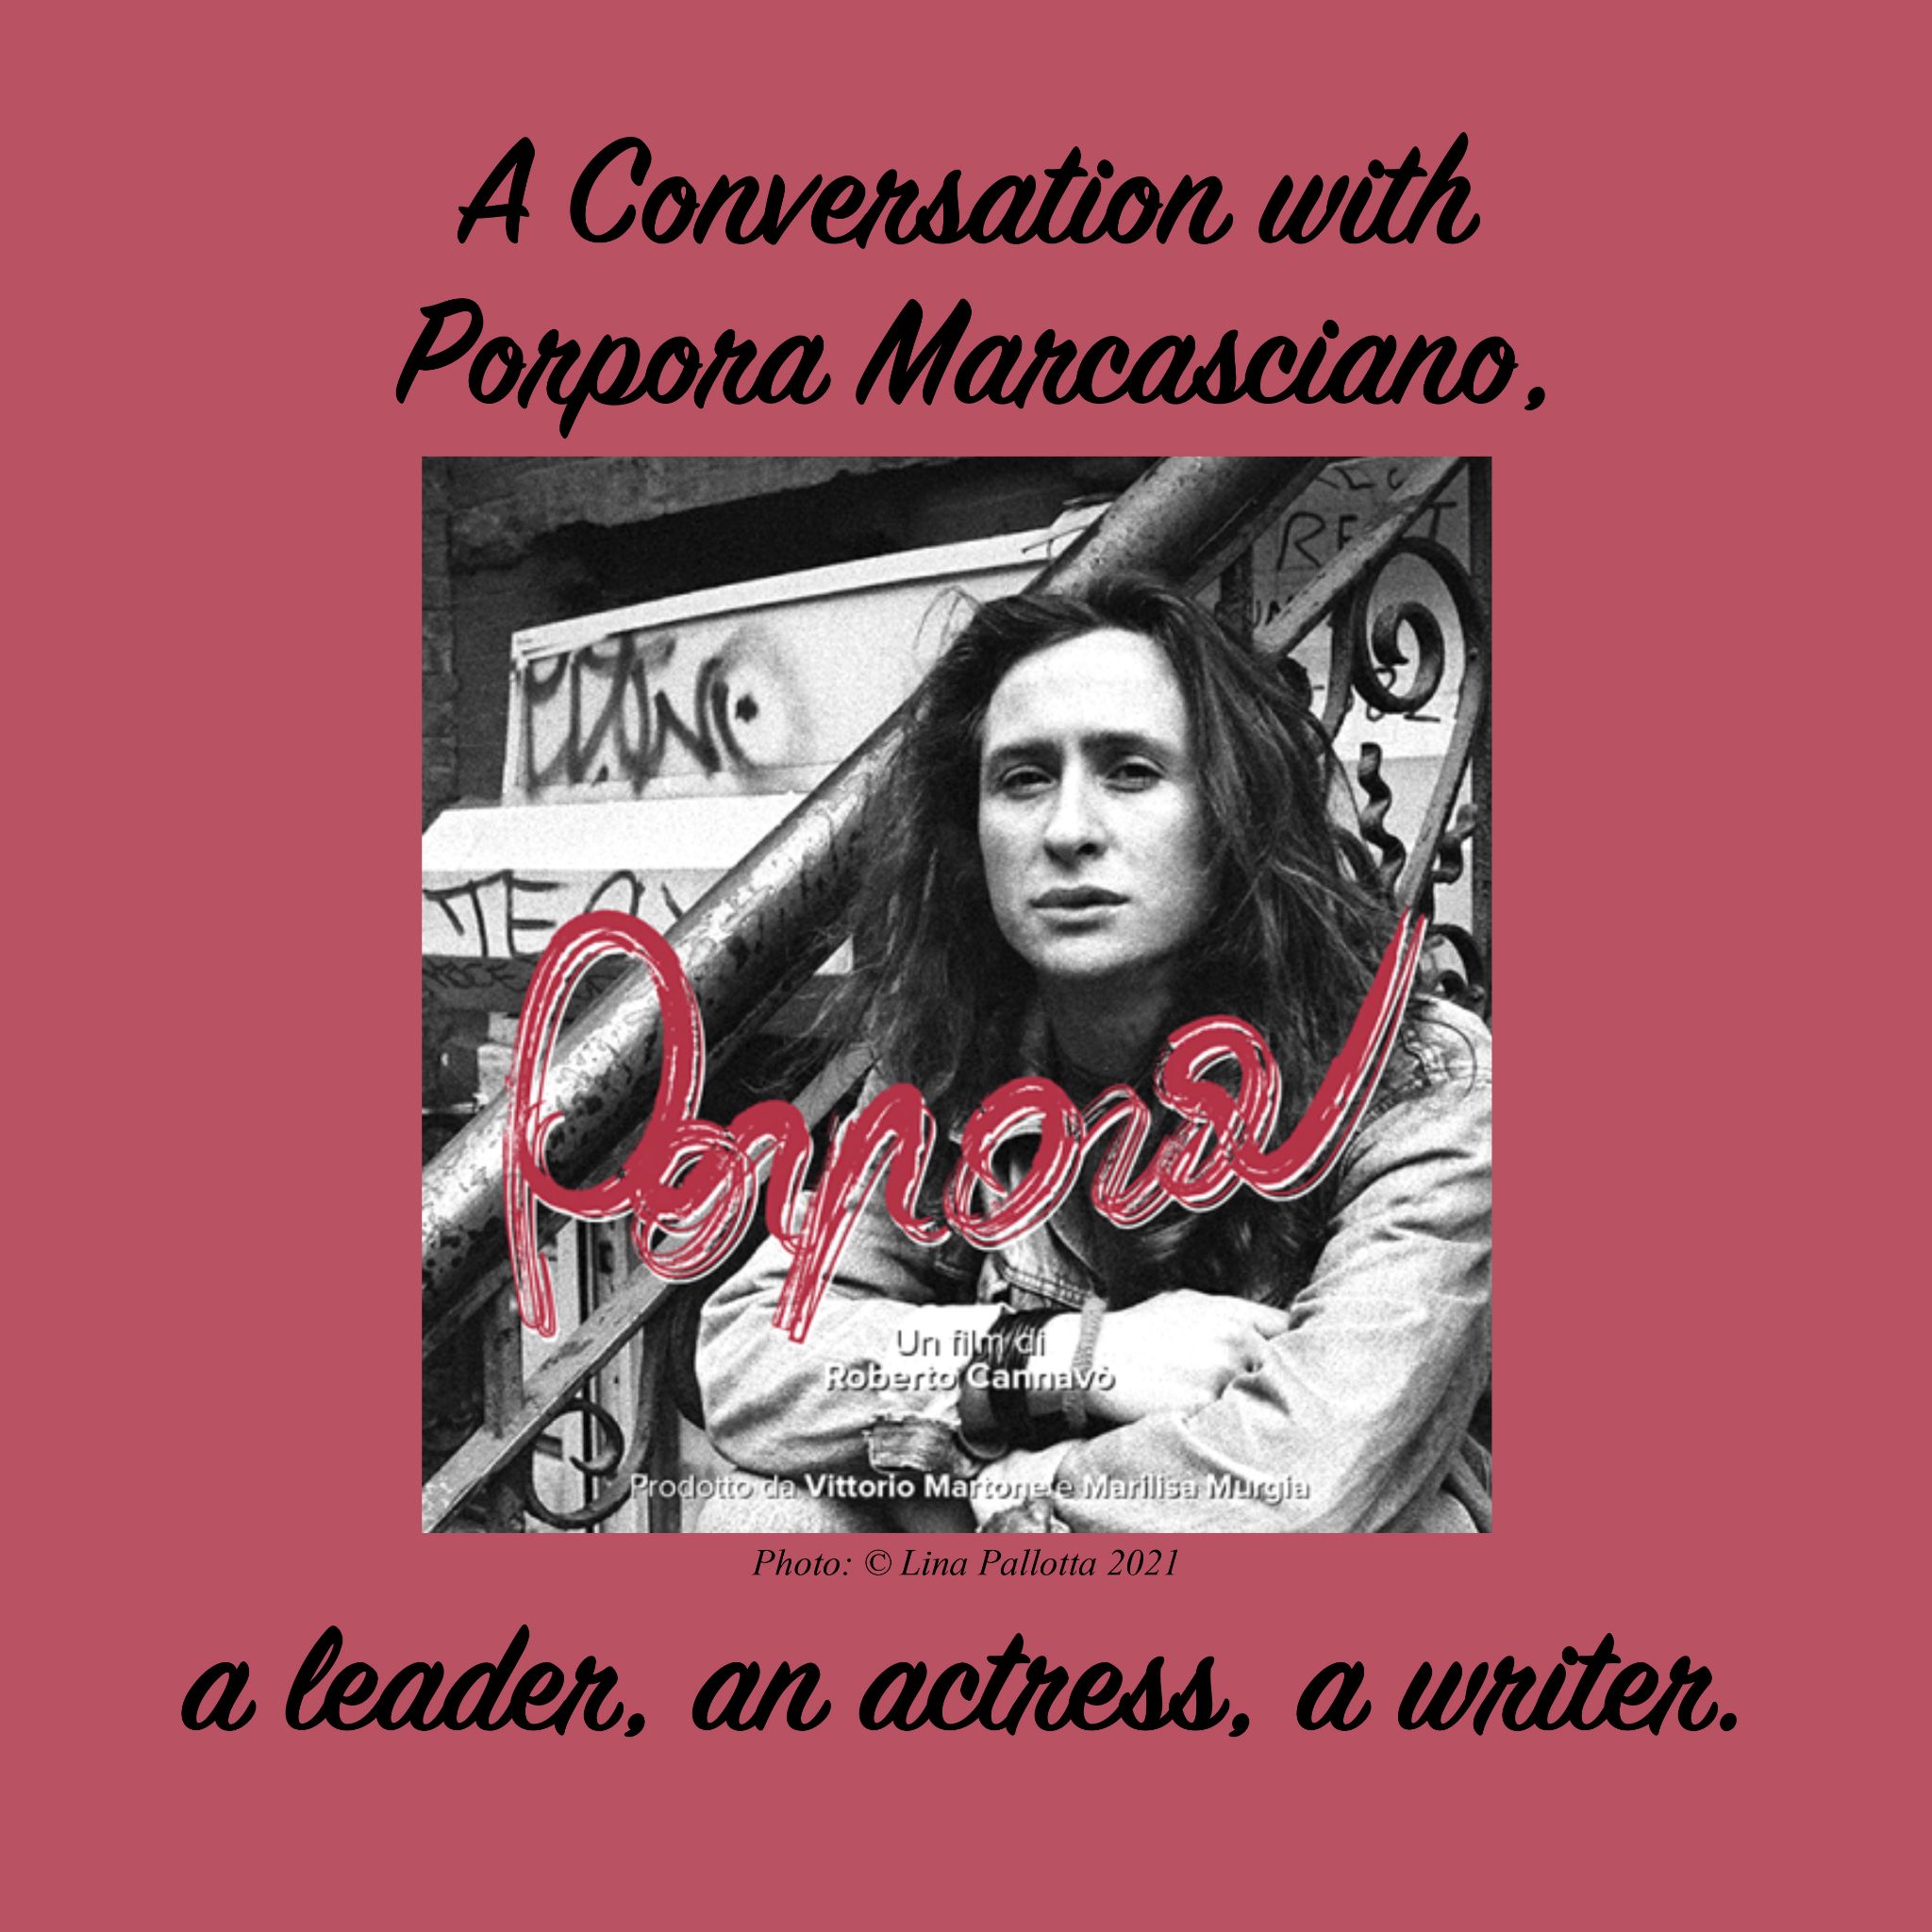 Event flyer featuring an image of Porpora Marcasiano looking off-camera in black and white.